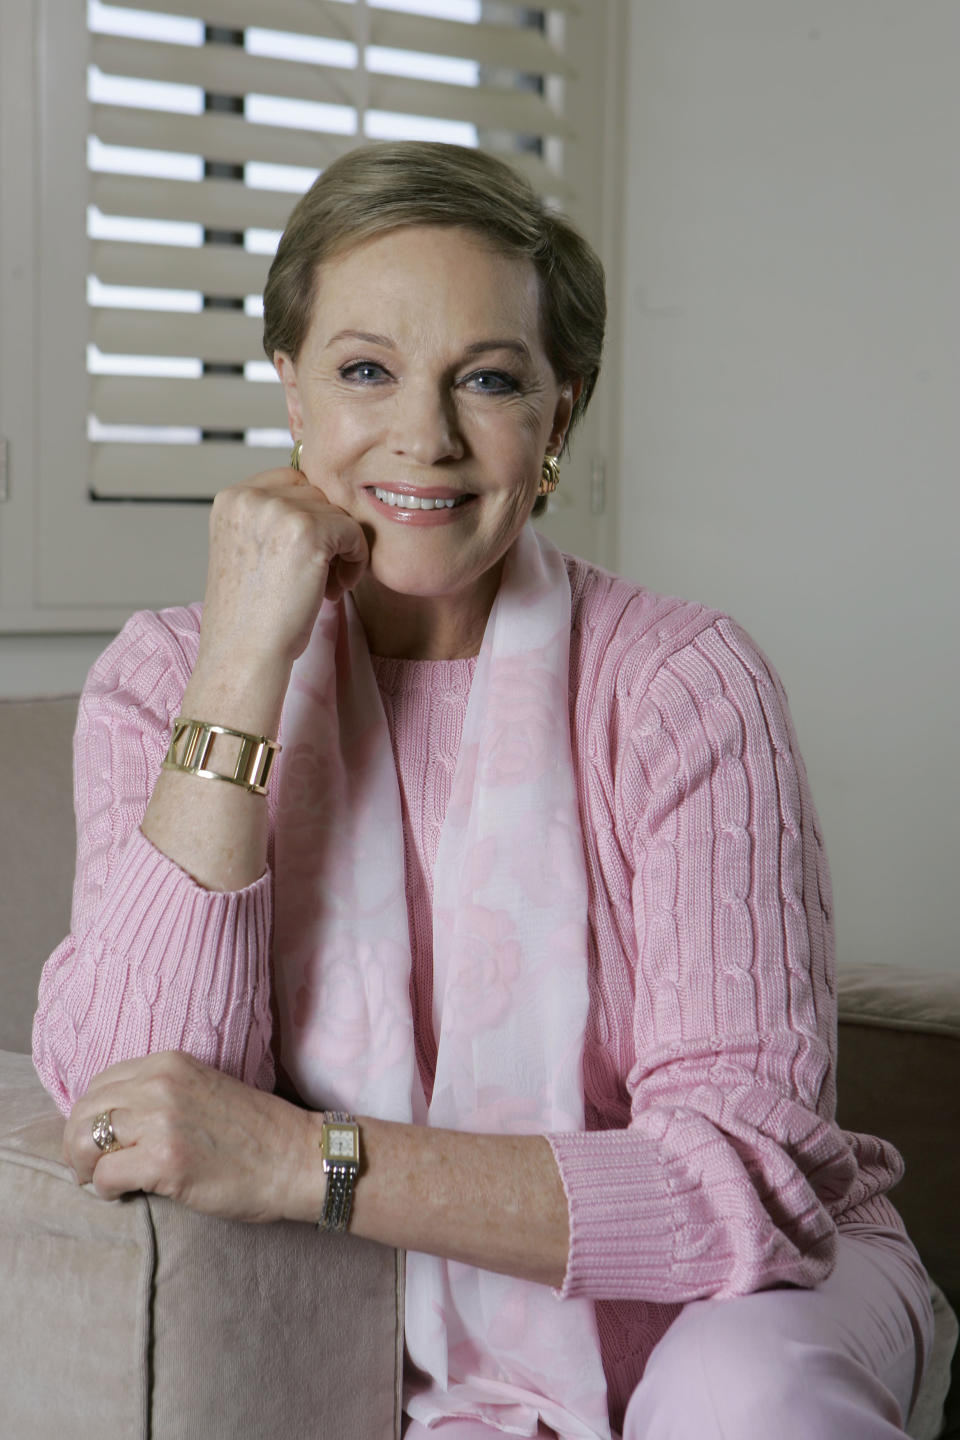 FILE - This May 5, 2007 file photo shows actress and singer Julie Andrews poses in Los Angeles. Andrews released a memoir, “Home Work: A Memoir of My Hollywood Years,” which hits shelves on Oct. 15, 2019. (AP Photo/Chris Carlson, File)